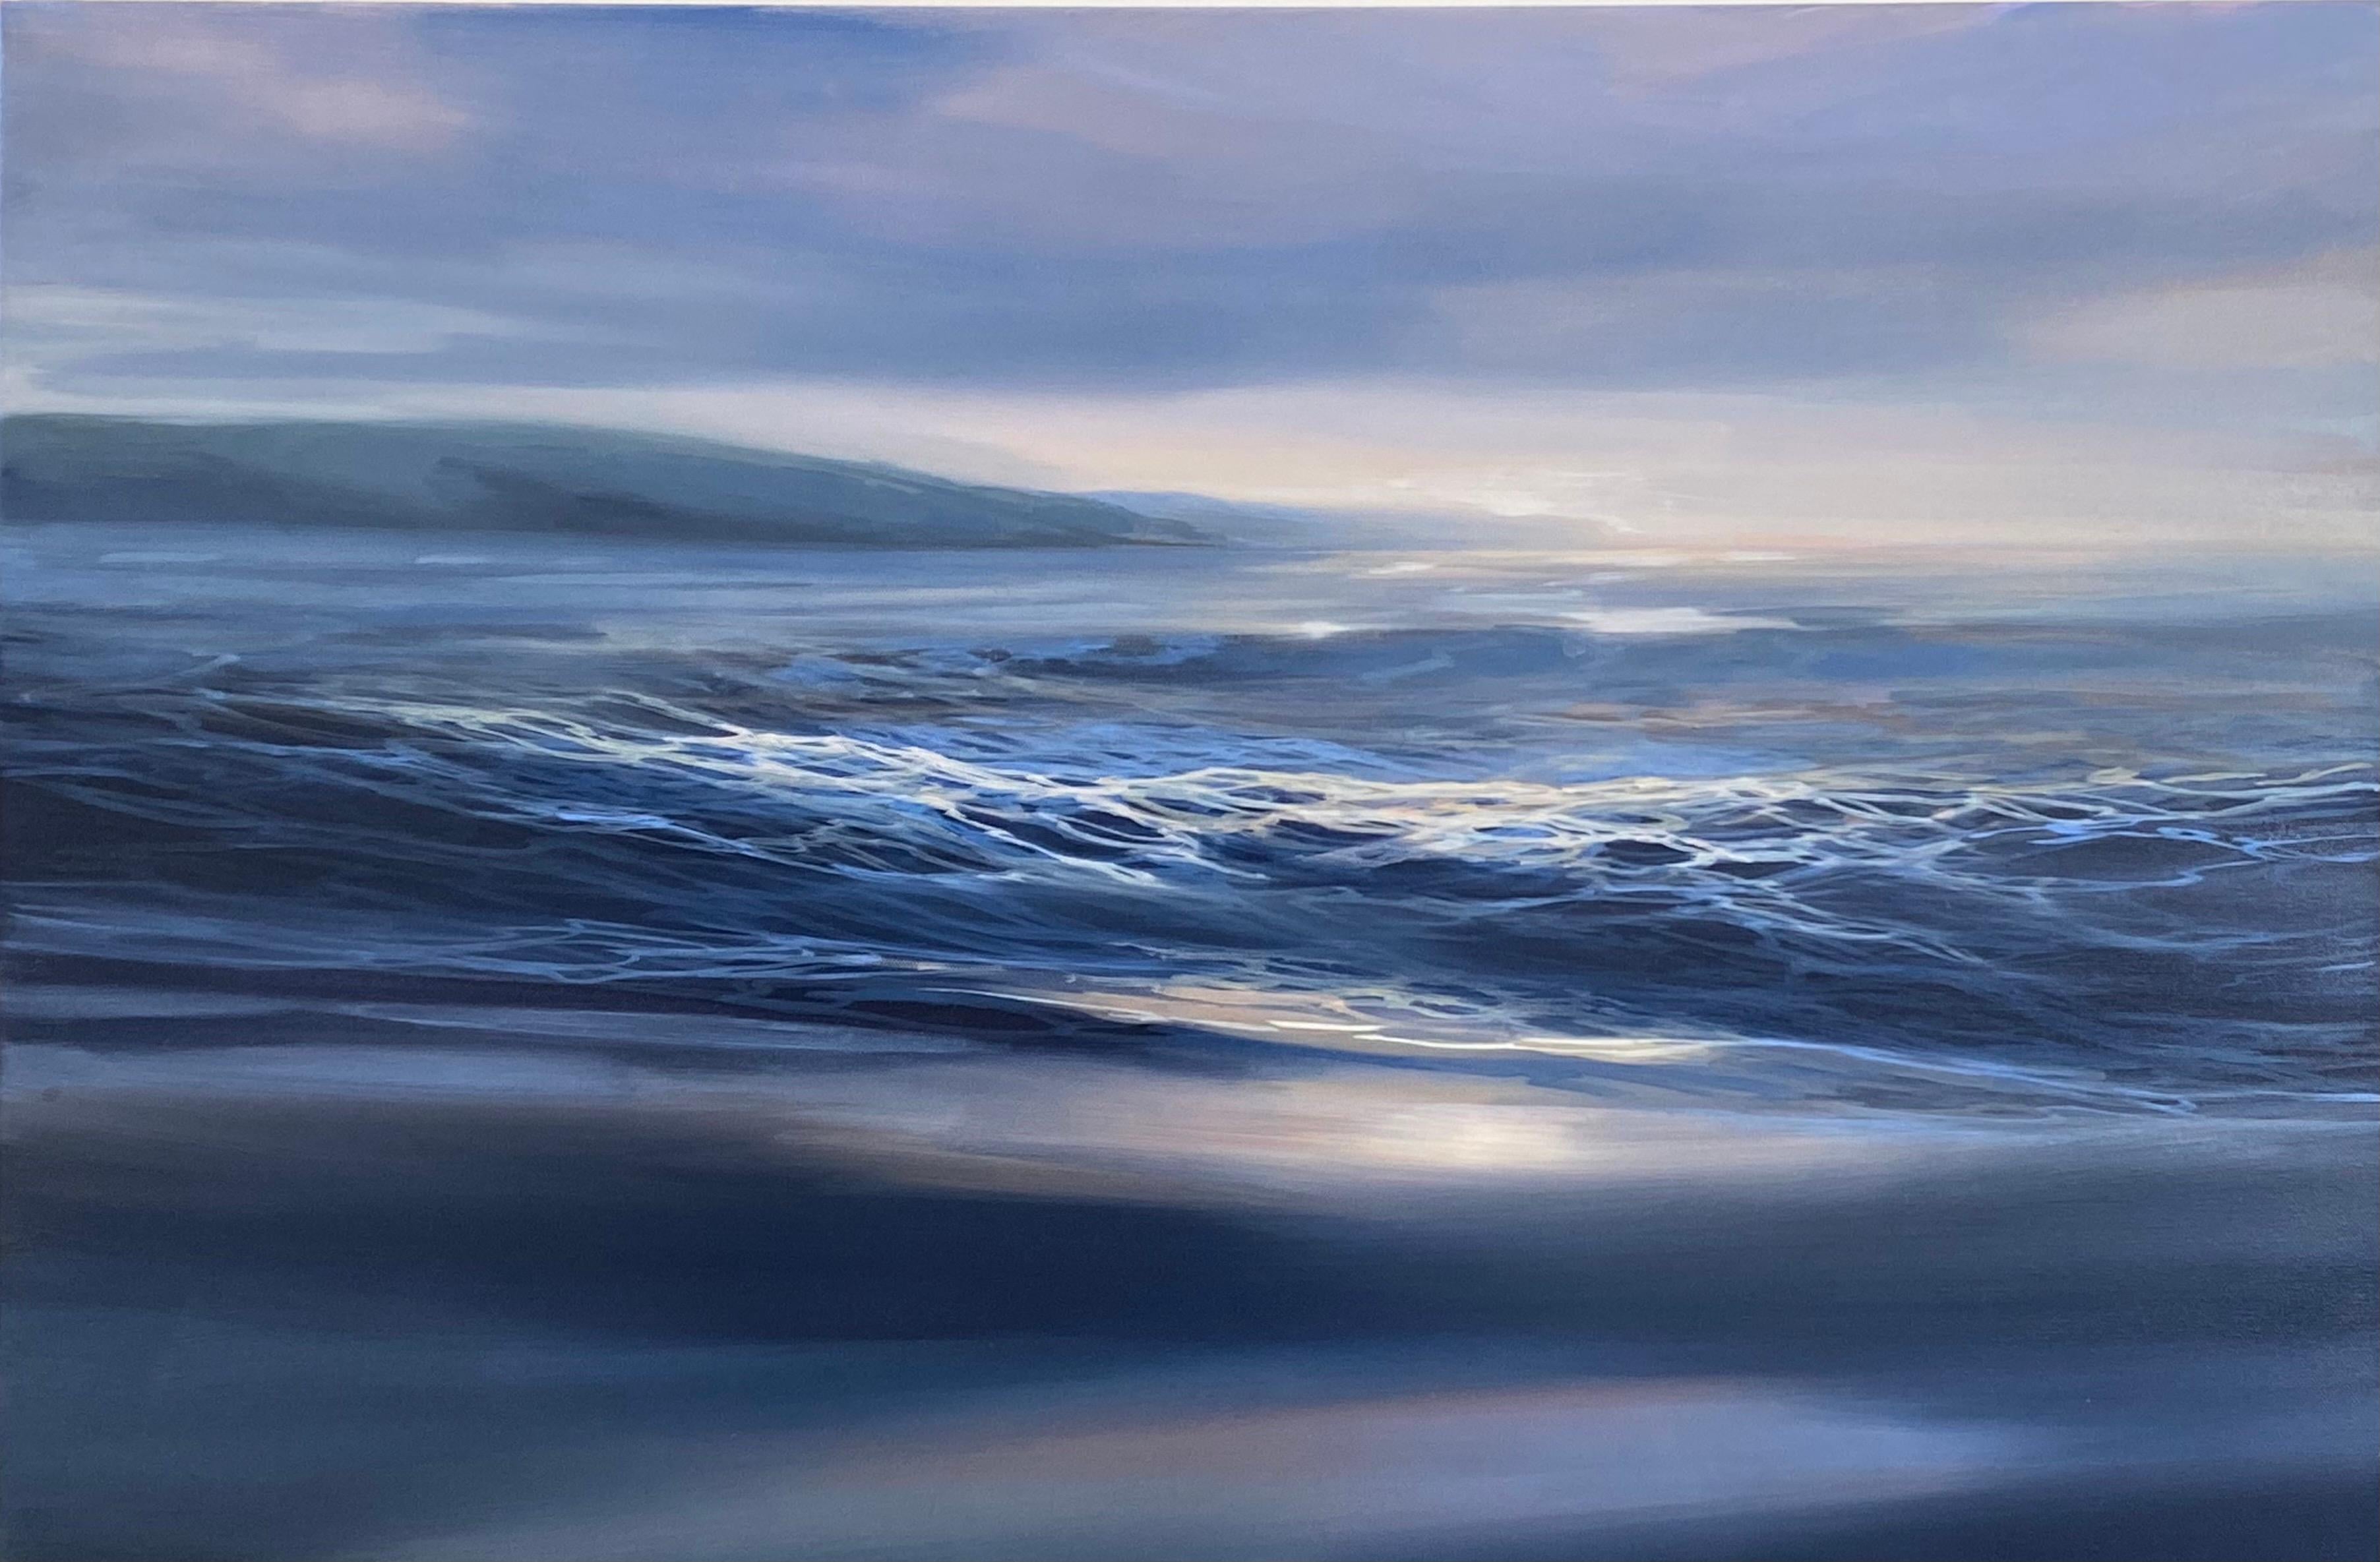 Nat Anderson Landscape Painting - The Sun's Final Kiss - ocean image fading to a distant headland, blue waves